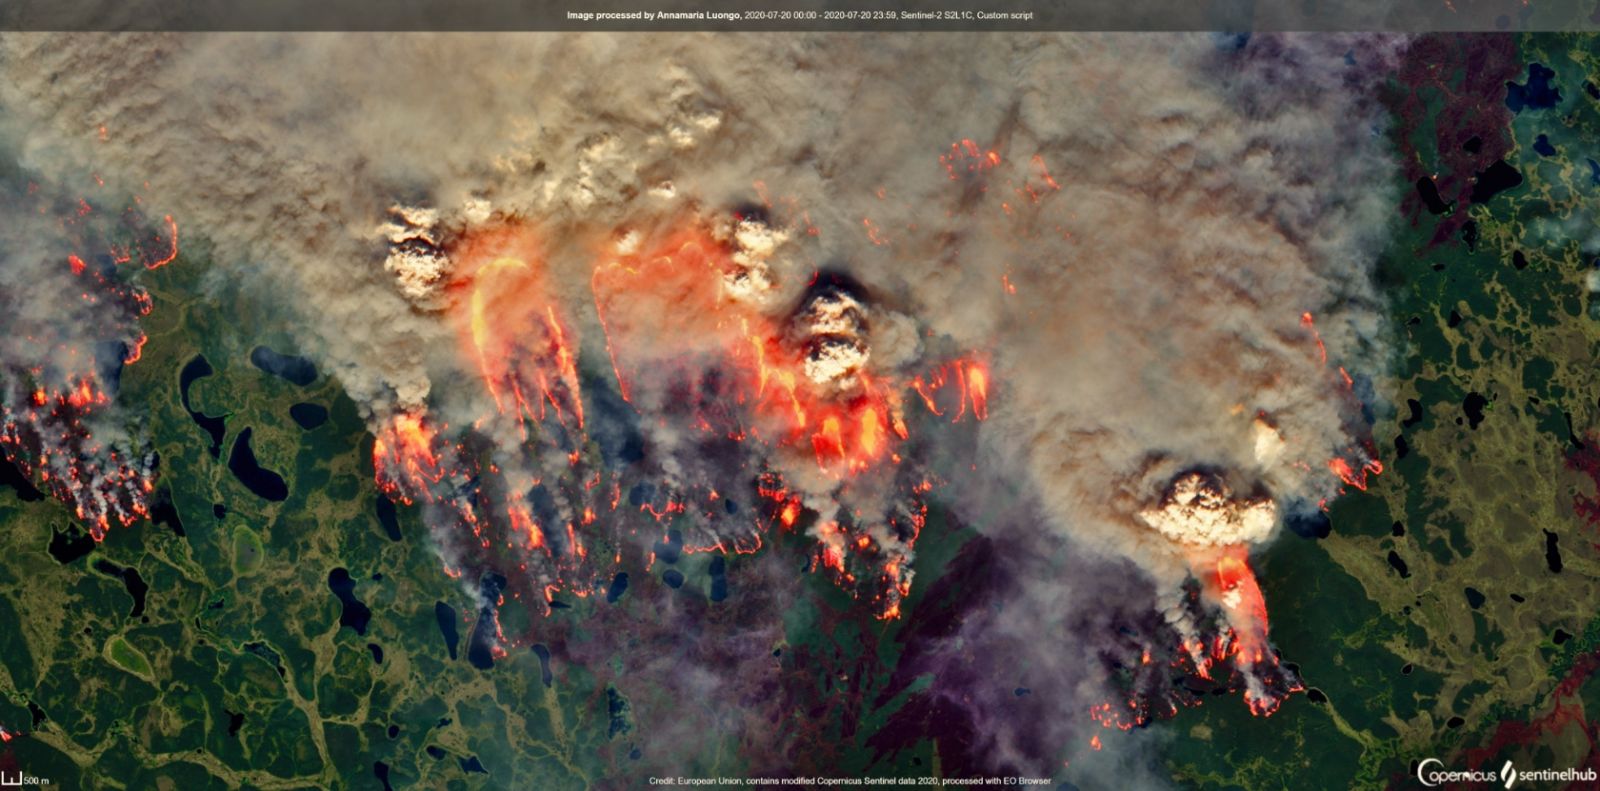 siberia-wildfires-by-annamarialuongo-july-20-2020